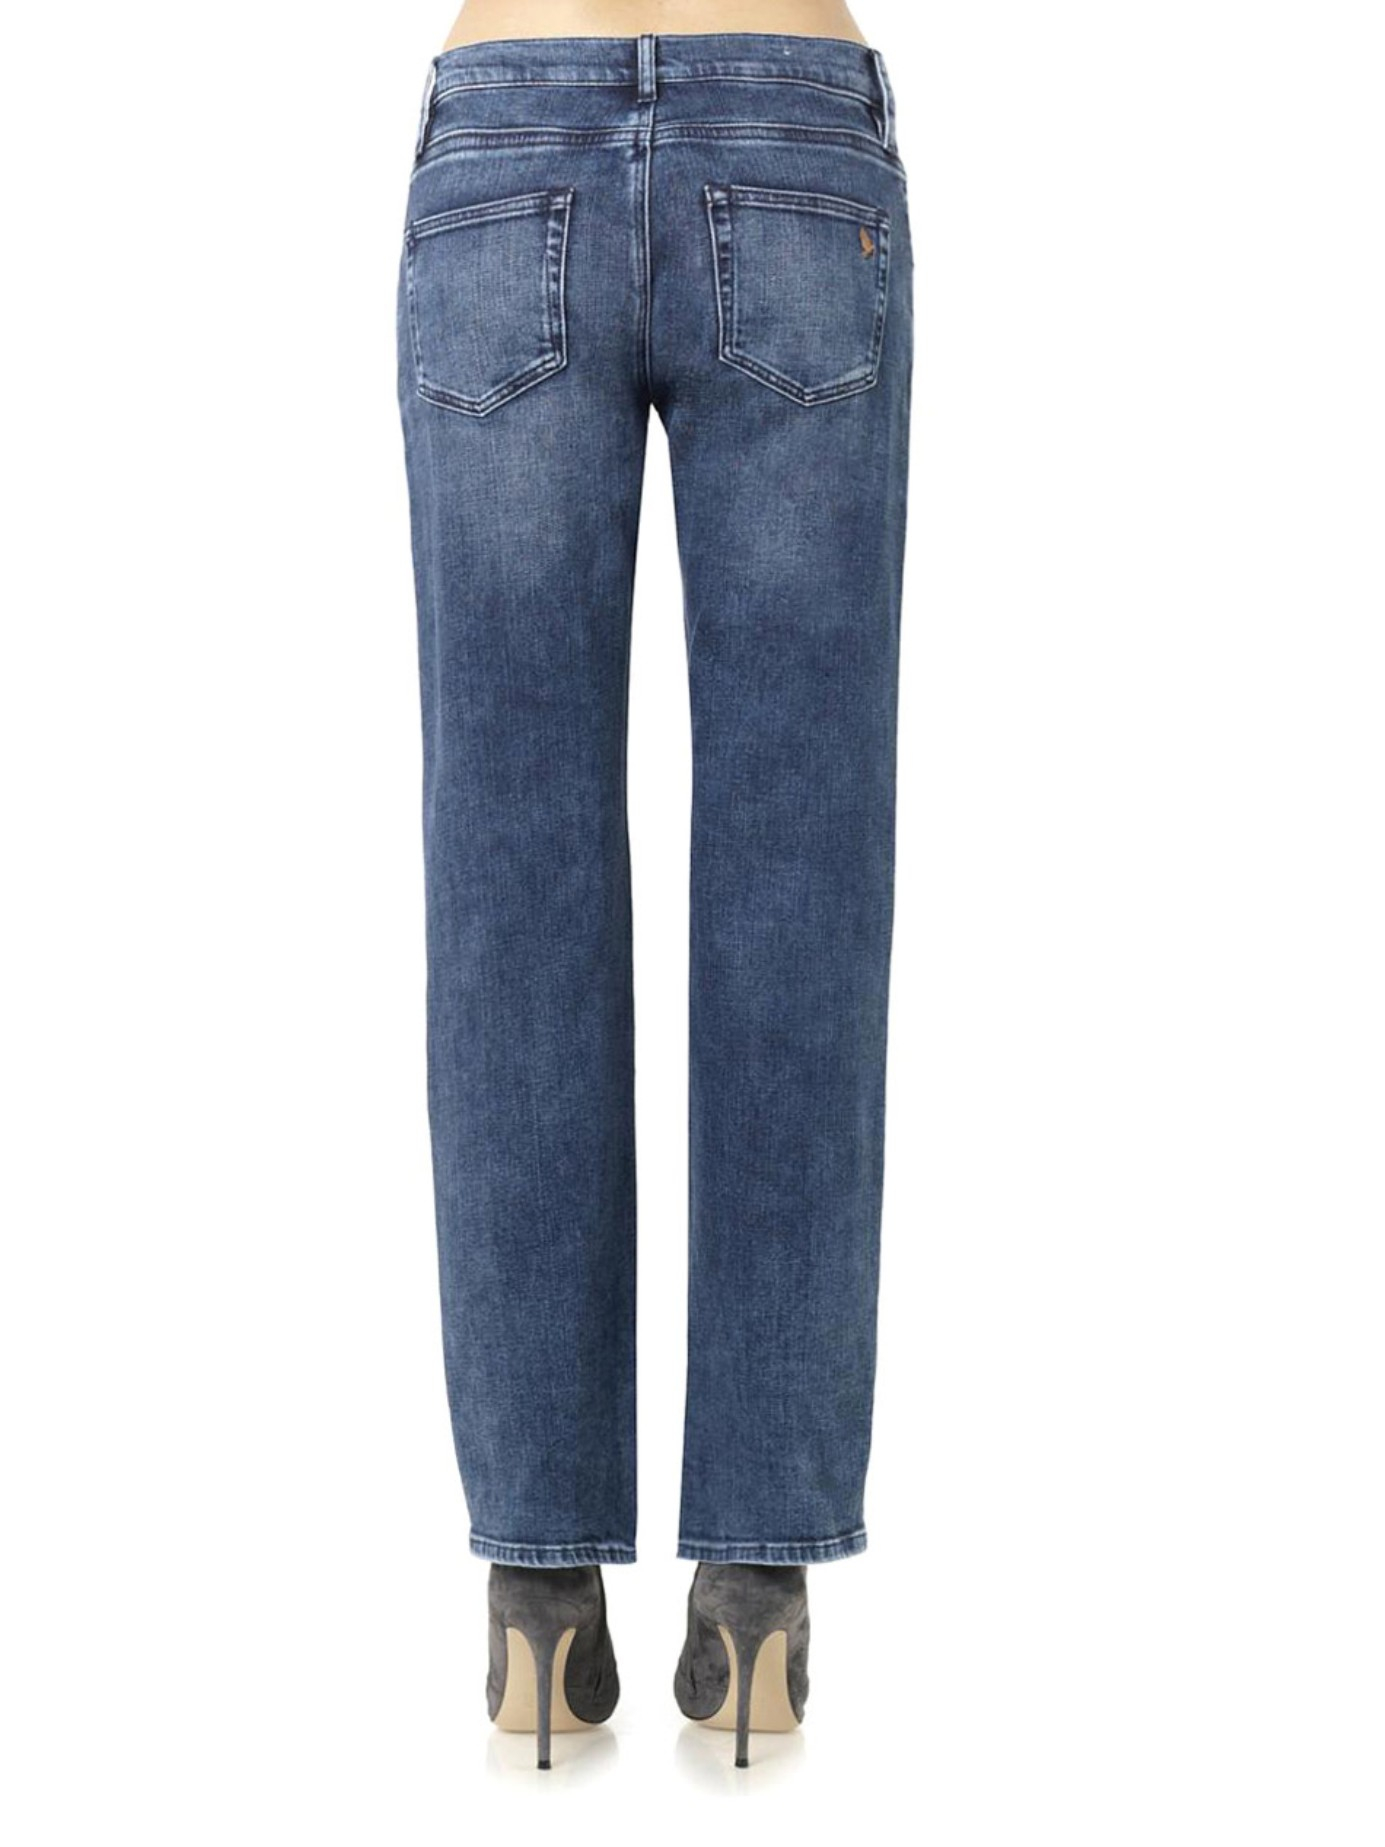 Lyst - M.I.H Jeans The Manchester Low-slung Boyfriend Jeans in Blue